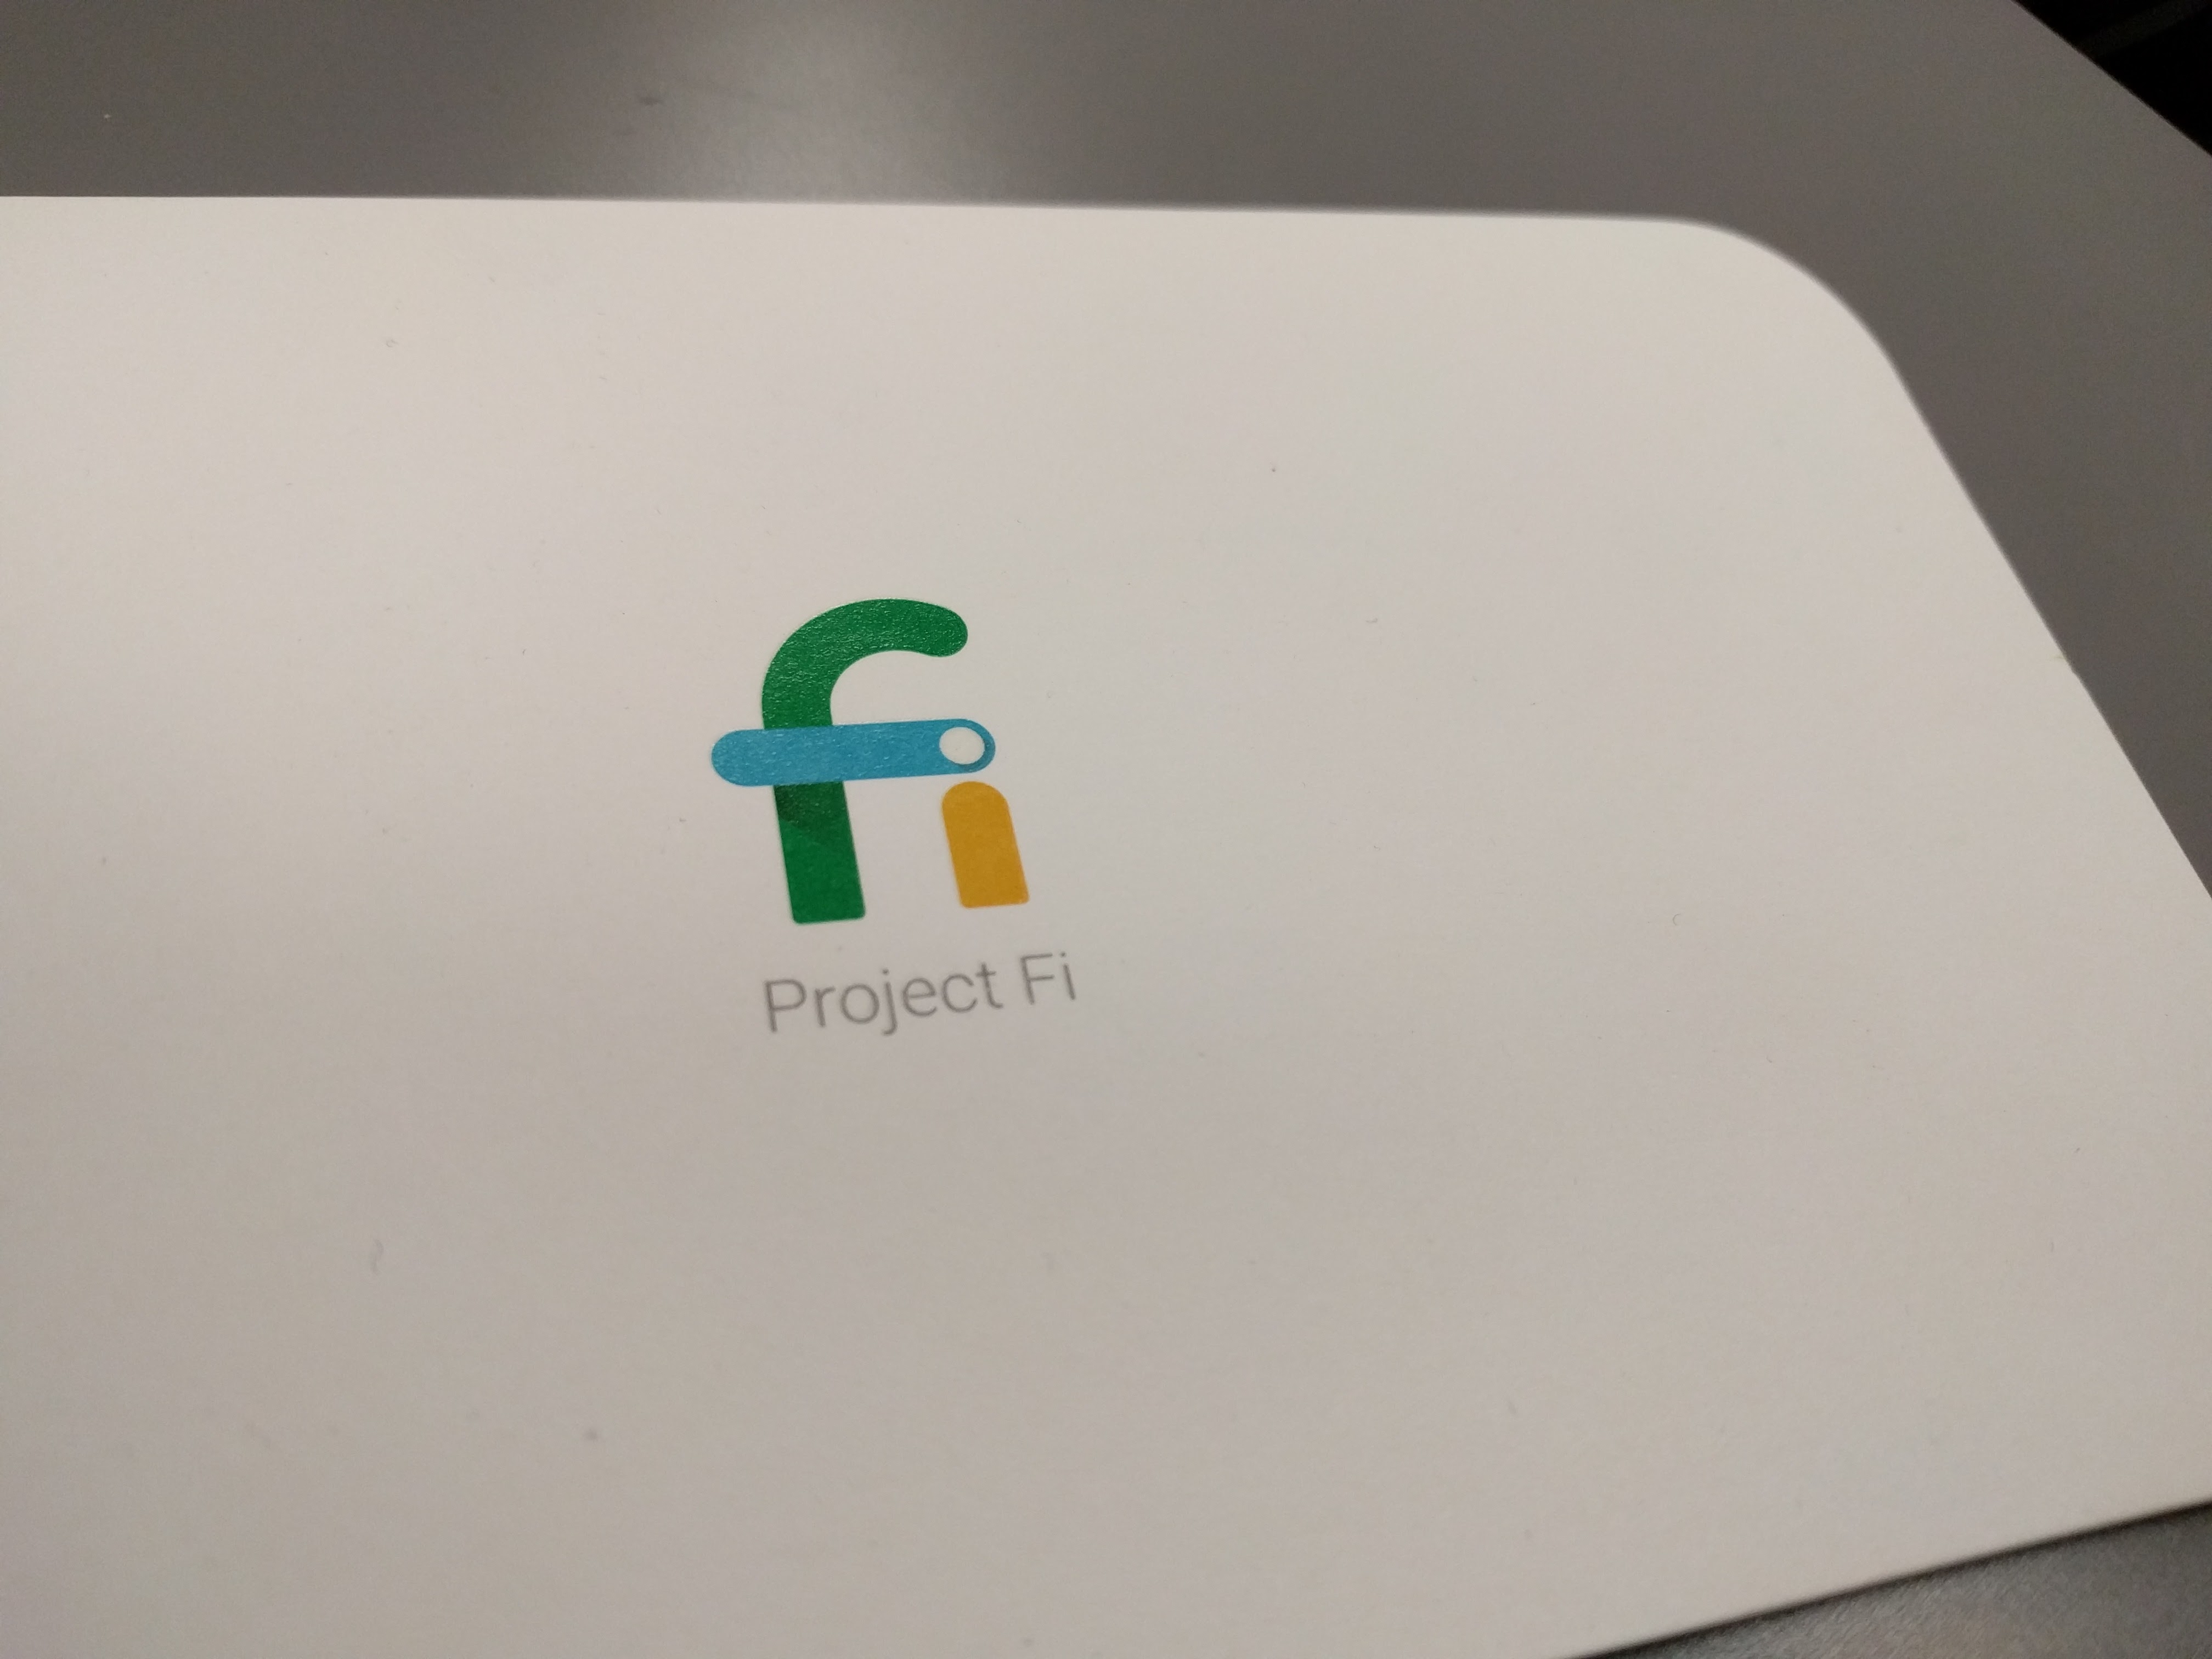 I started using the Project Fi SIM card after our Nexus 5X review unit came in.